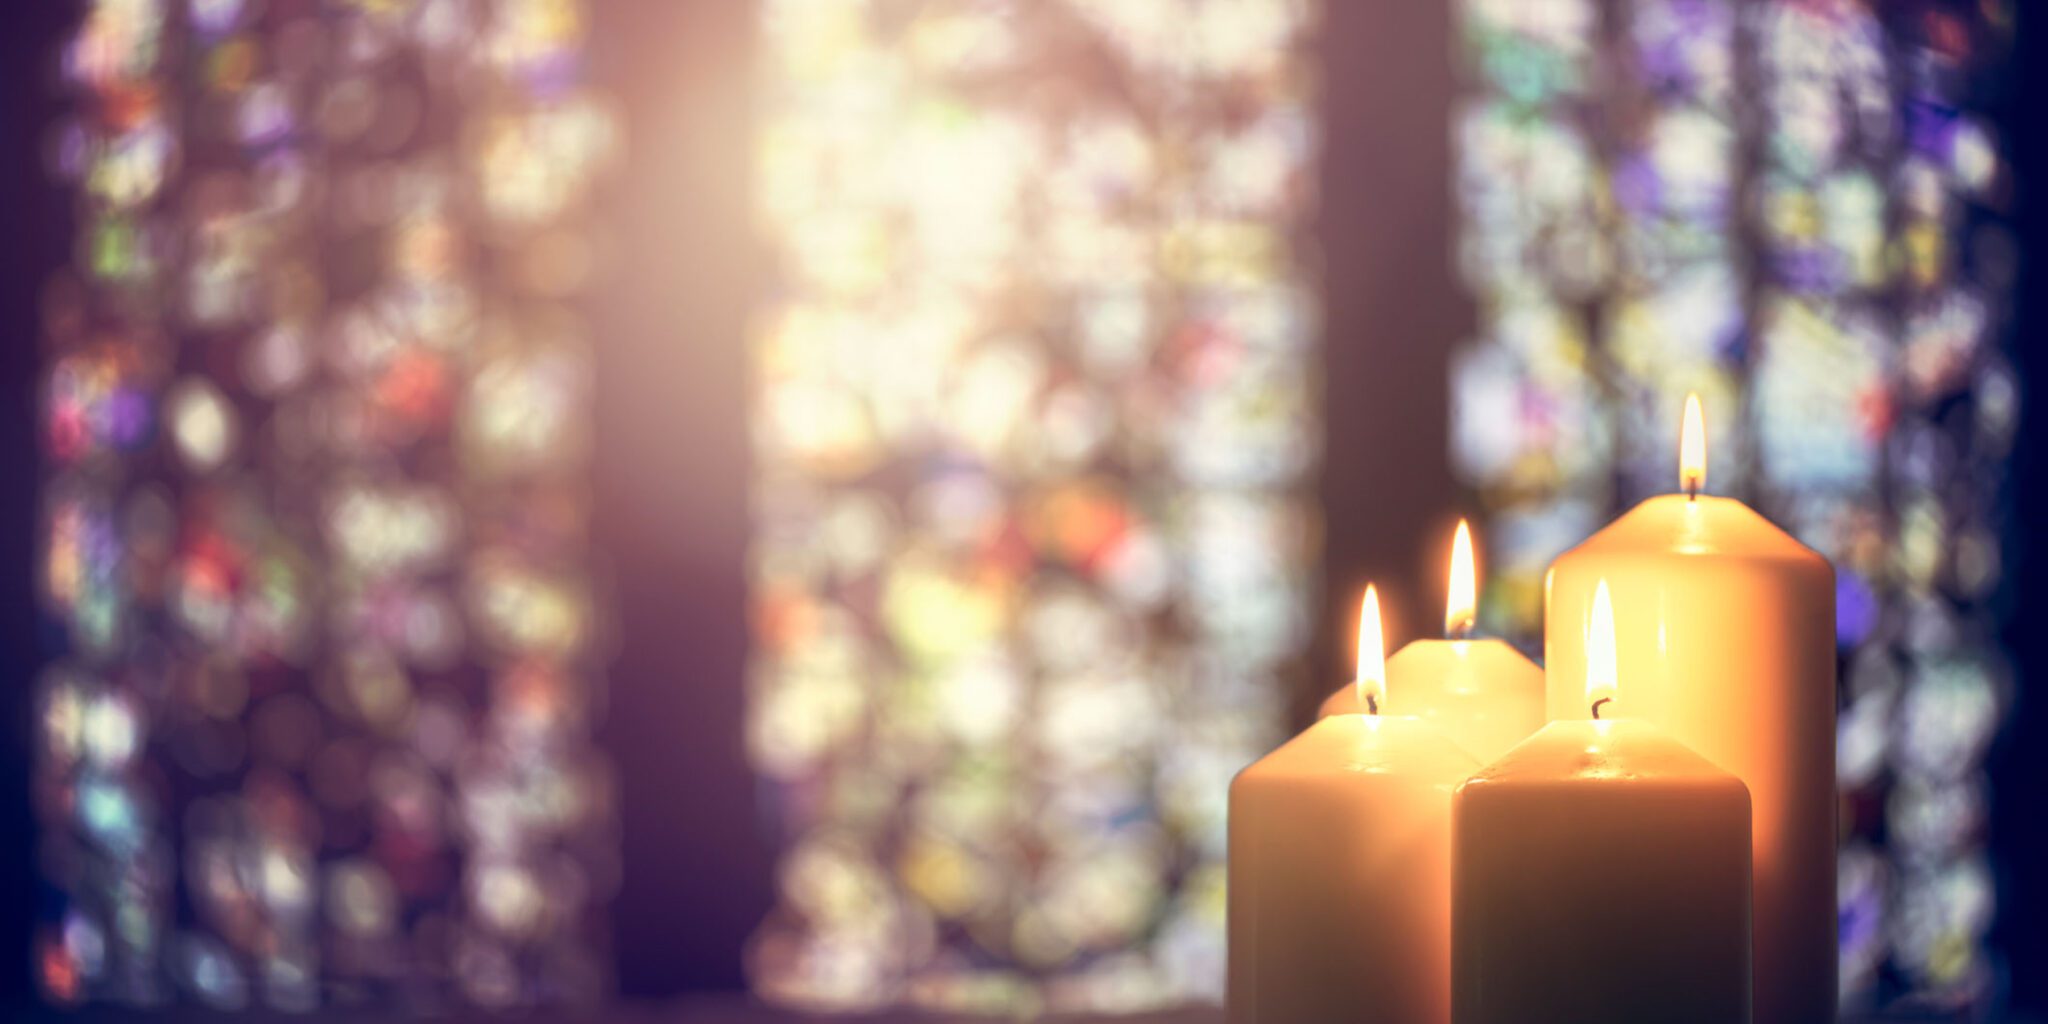 Is Religion an Antidote to Depression?